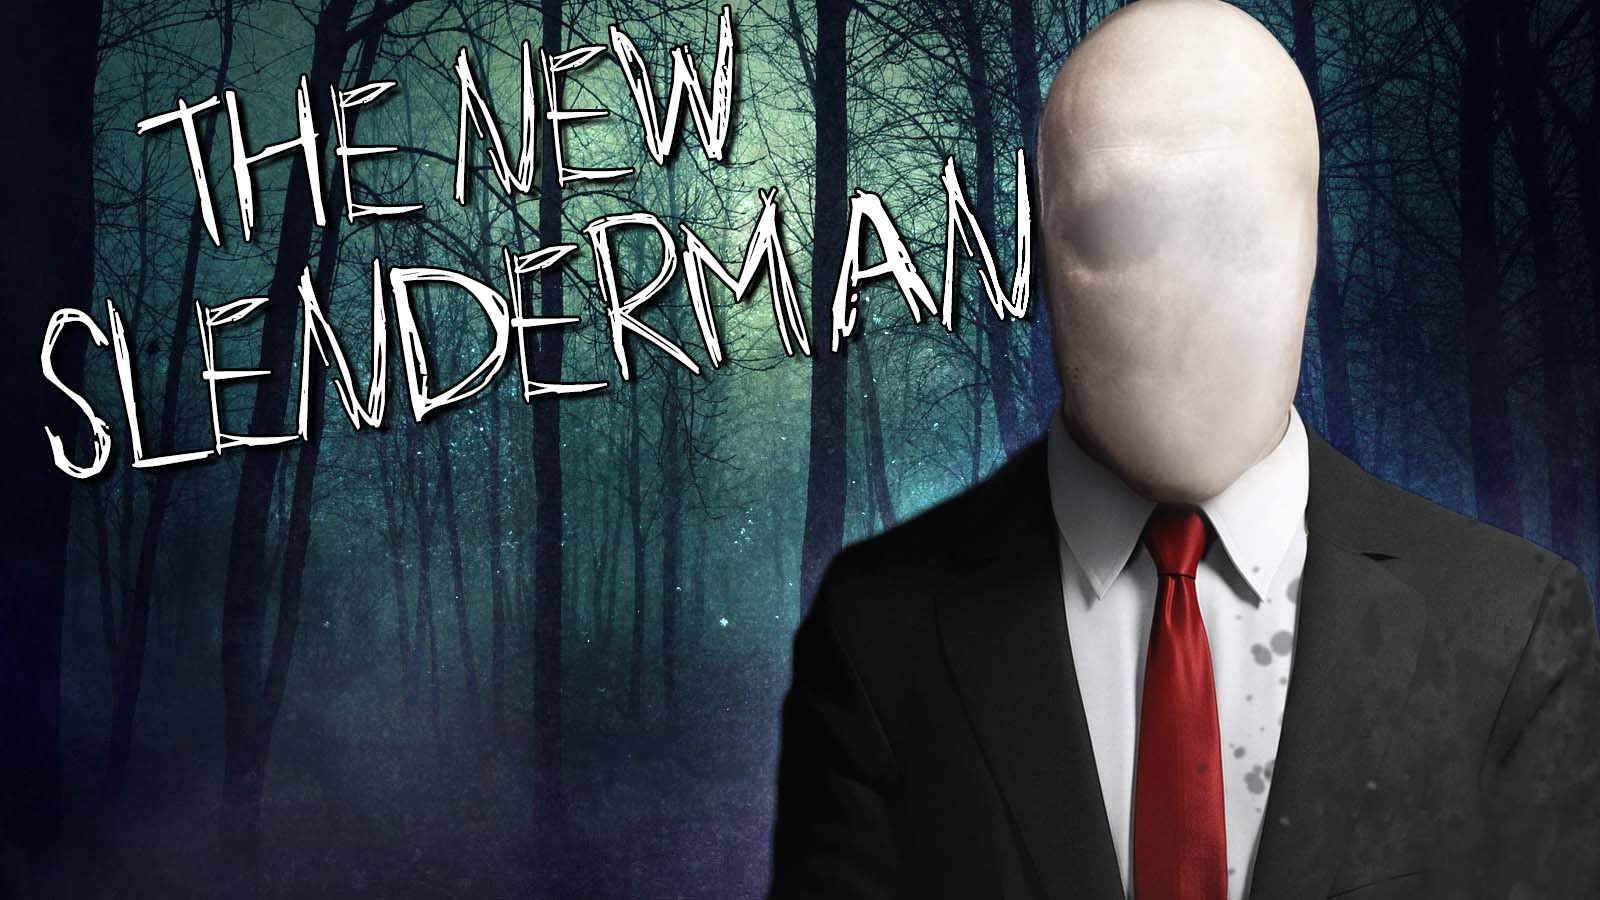 How Is Slenderman Connected to Online Gaming Sensation Minecraft? - Parade